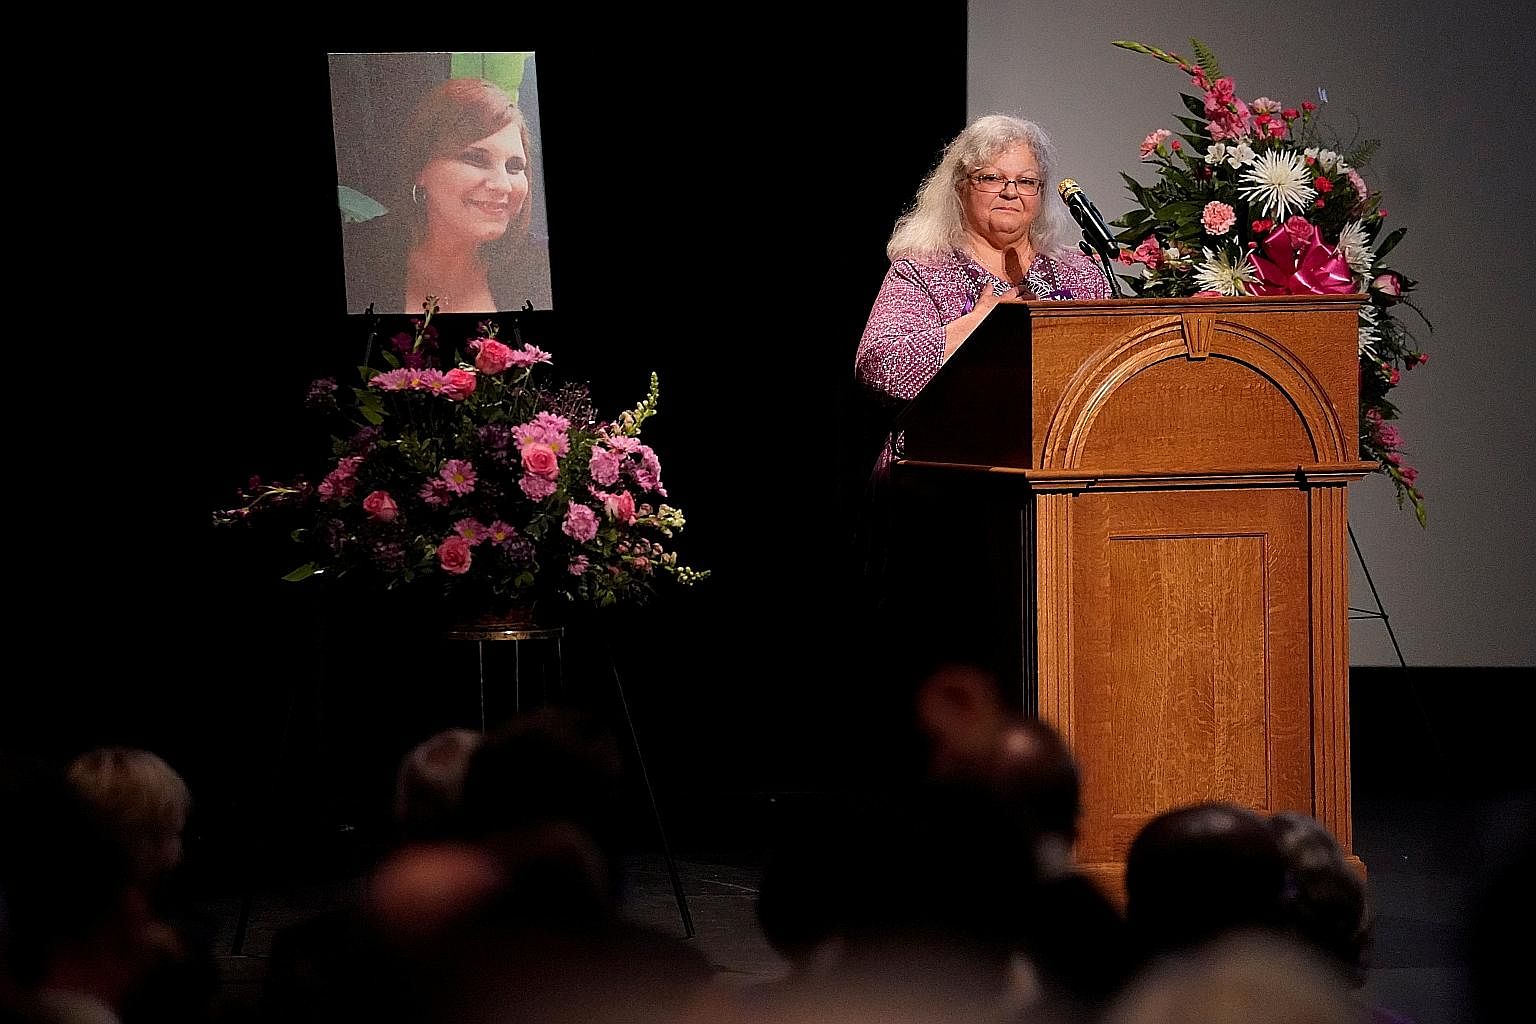 Charlottesville car attack victim Heather Heyer's mother Susan Bro received a standing ovation during her remarks at a memorial service for her daughter at the city's Paramount Theatre on Wednesday.